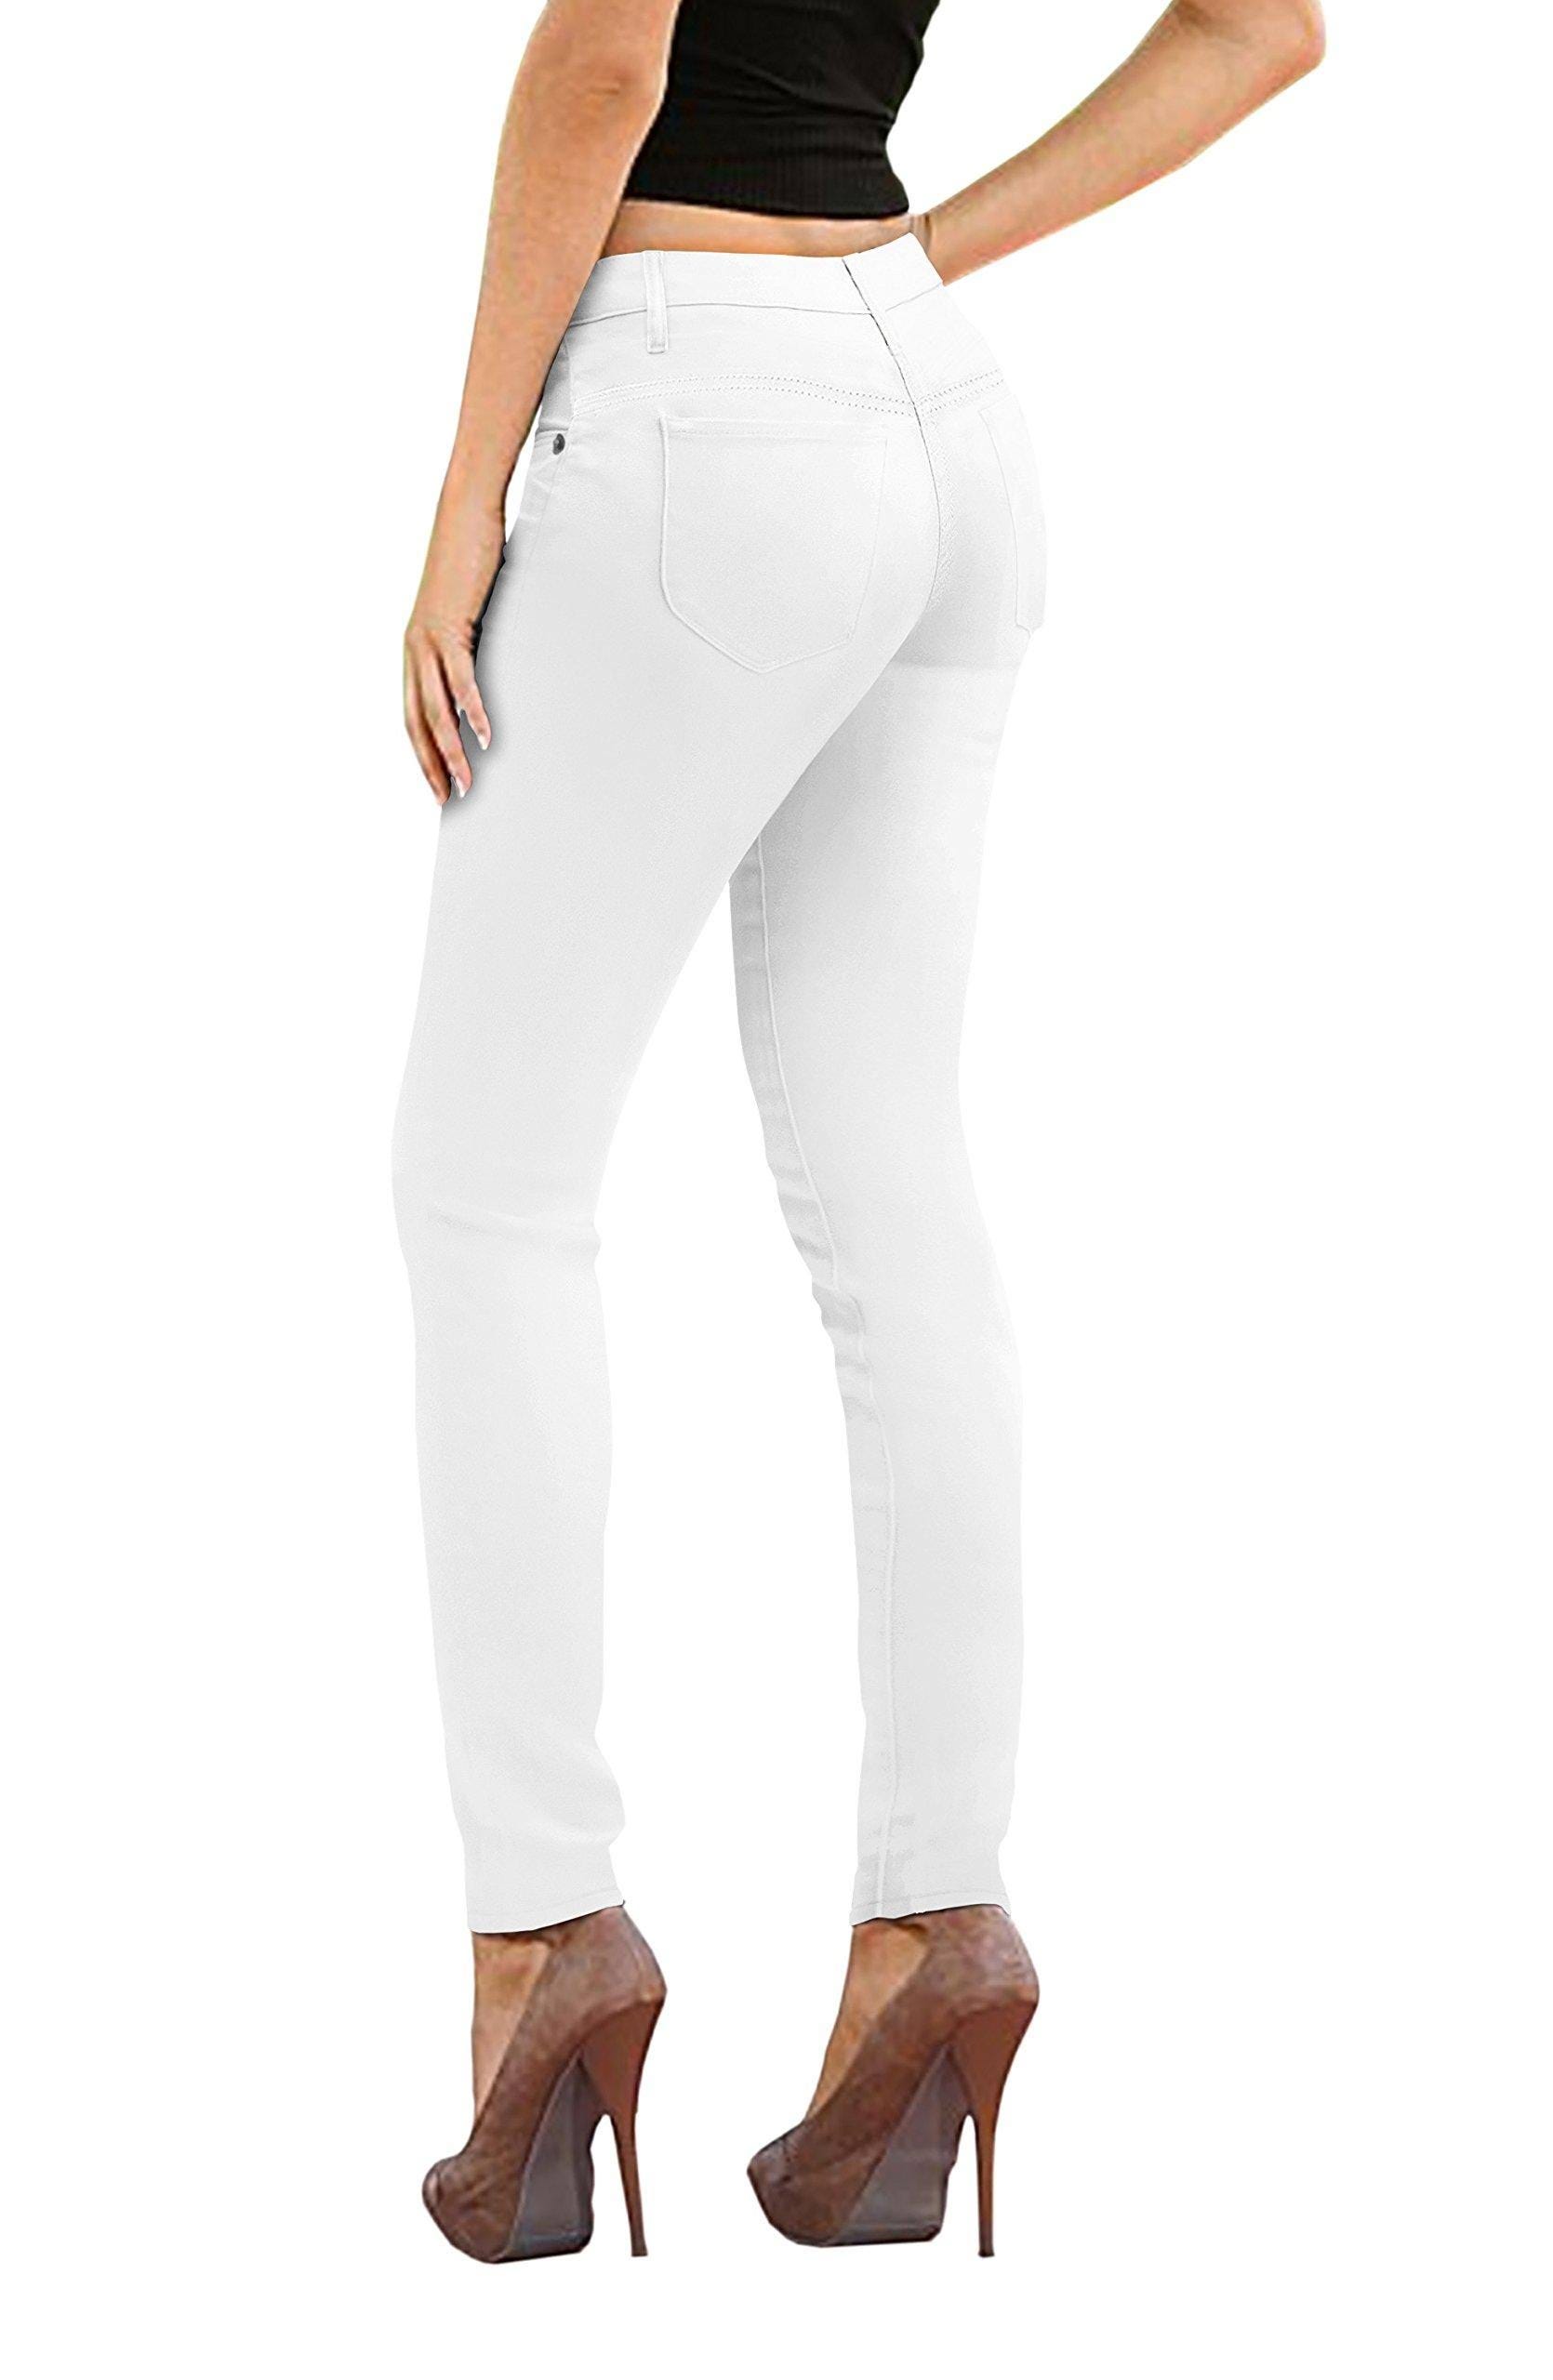 Stylish and Super Stretch Hybrid White Jeans for Ladies | Image